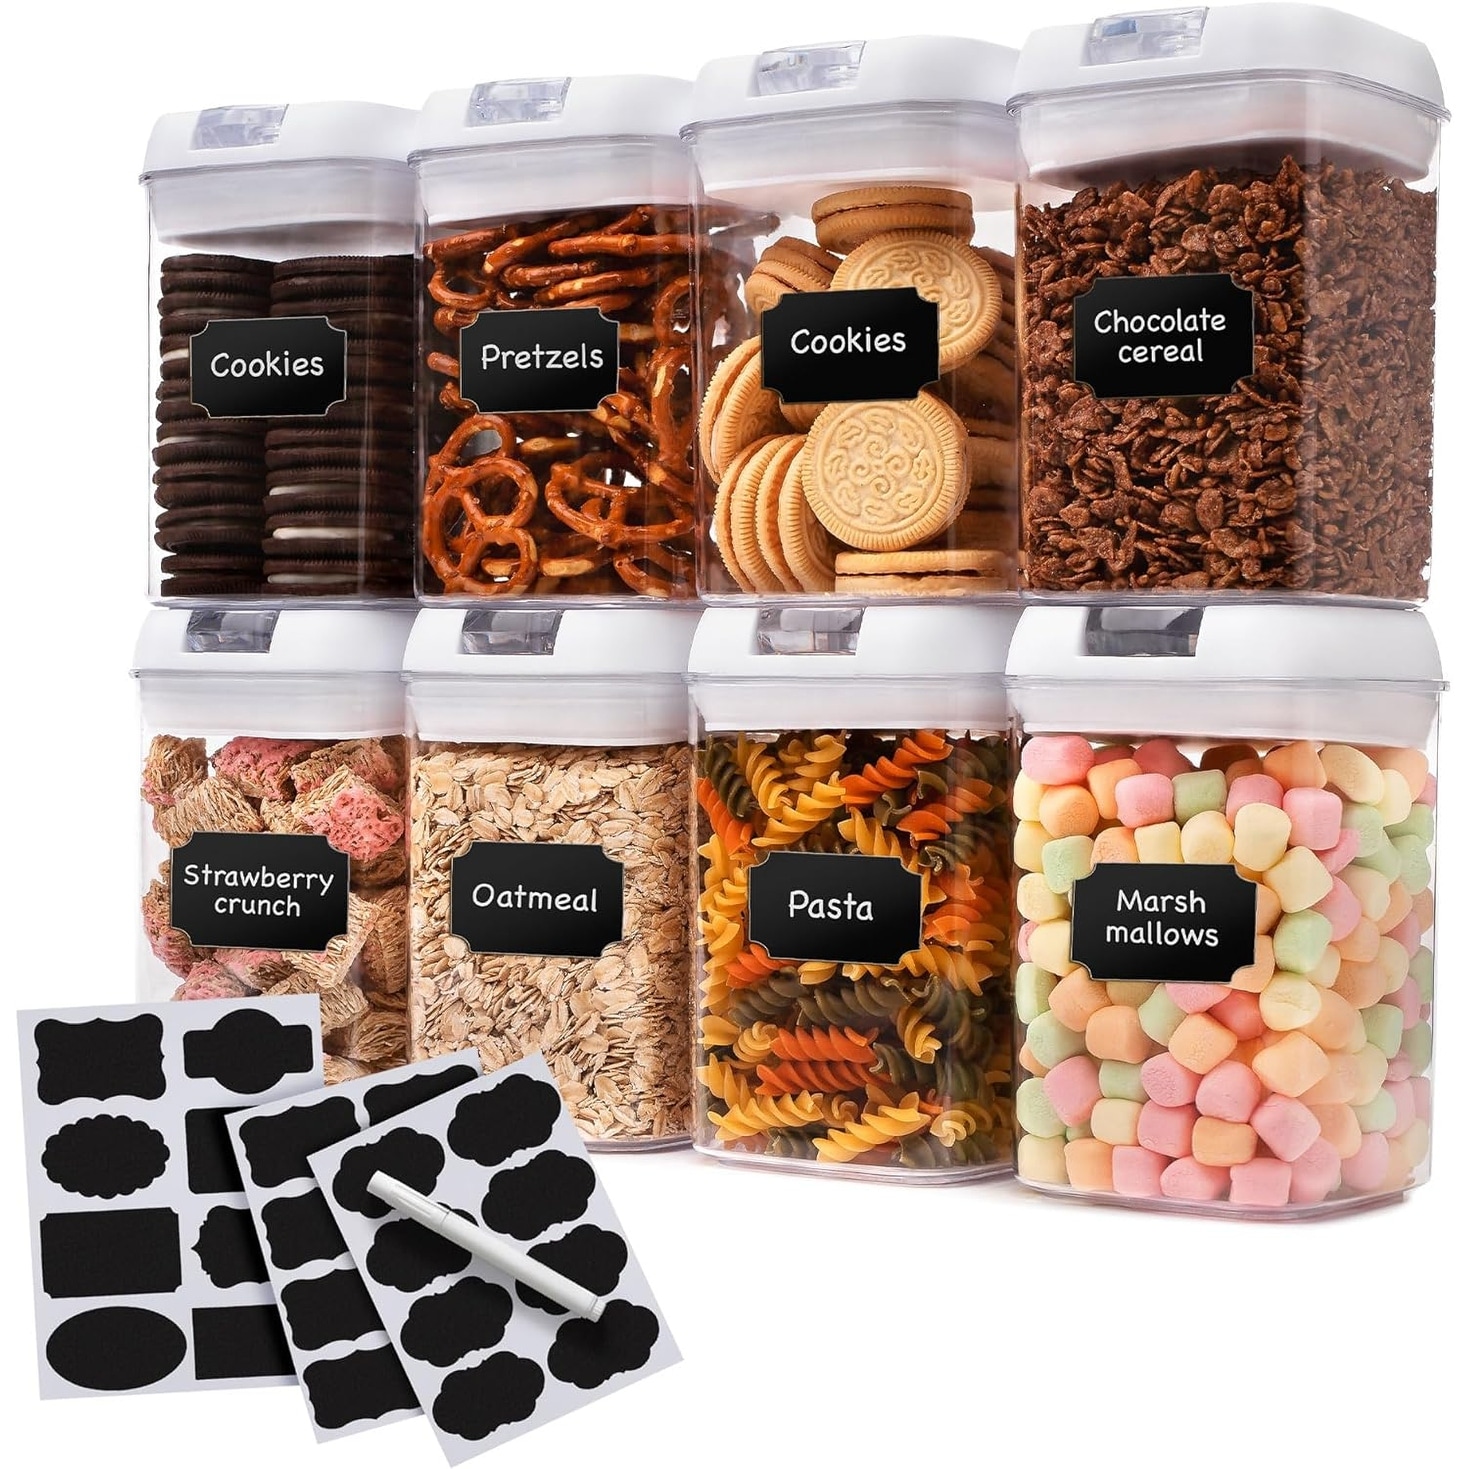 https://ak1.ostkcdn.com/images/products/is/images/direct/6d60b64a85c9e140064fd0484da4fcb23fd4adef/Cheer-Collection-Set-of-8-Uniform-Size-Airtight-Food-Storage-Containers.jpg